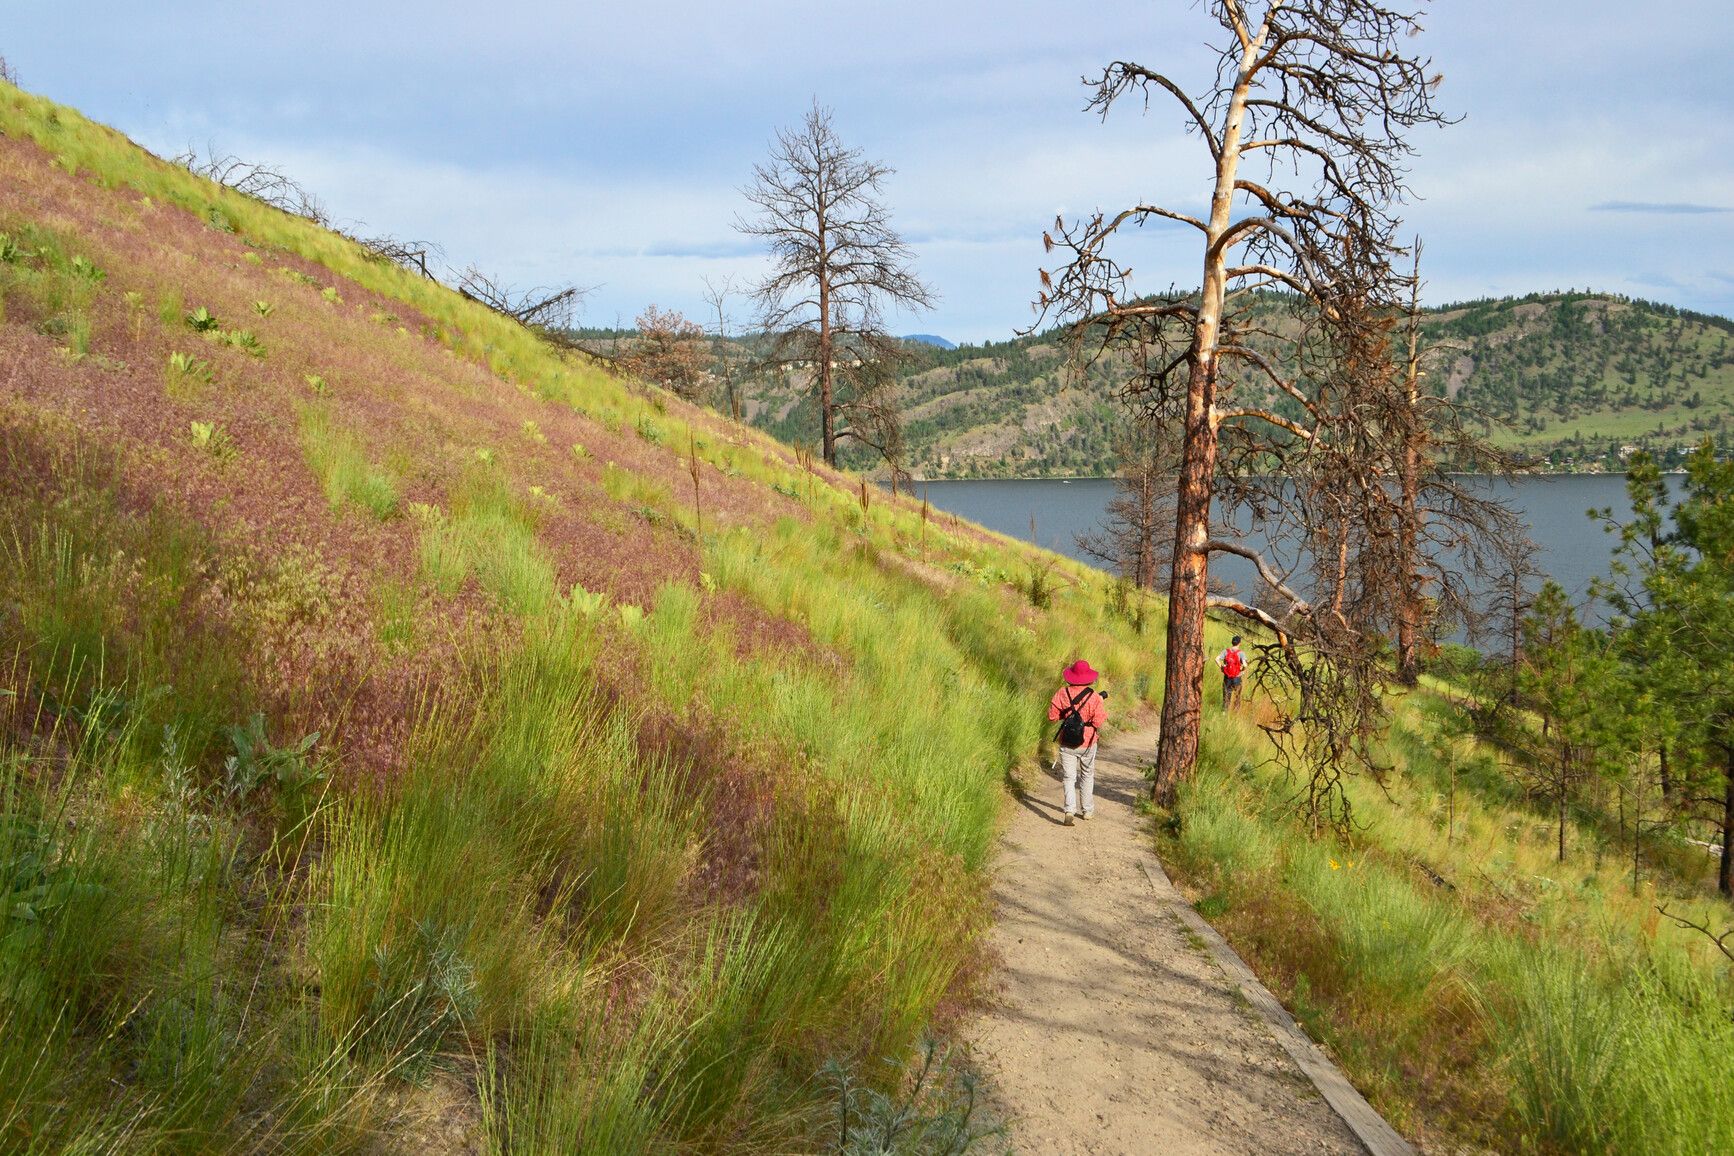 A park visitor walks a trail in Bear Creek Park. In the background is Okanagan Lake.